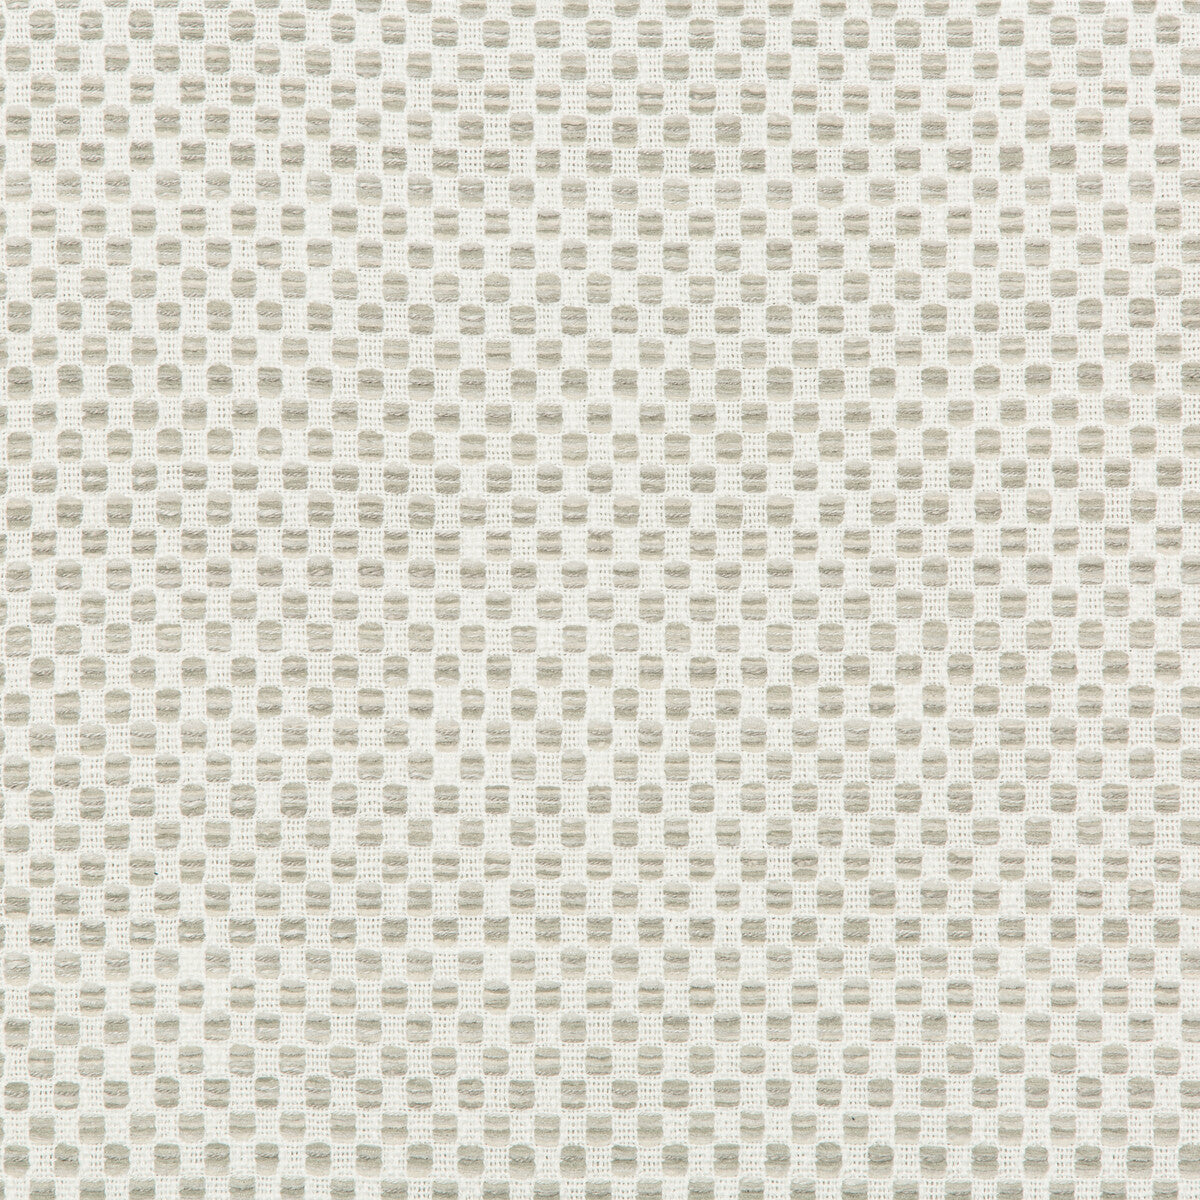 Kravet Design fabric in 36090-11 color - pattern 36090.11.0 - by Kravet Design in the Inside Out Performance Fabrics collection